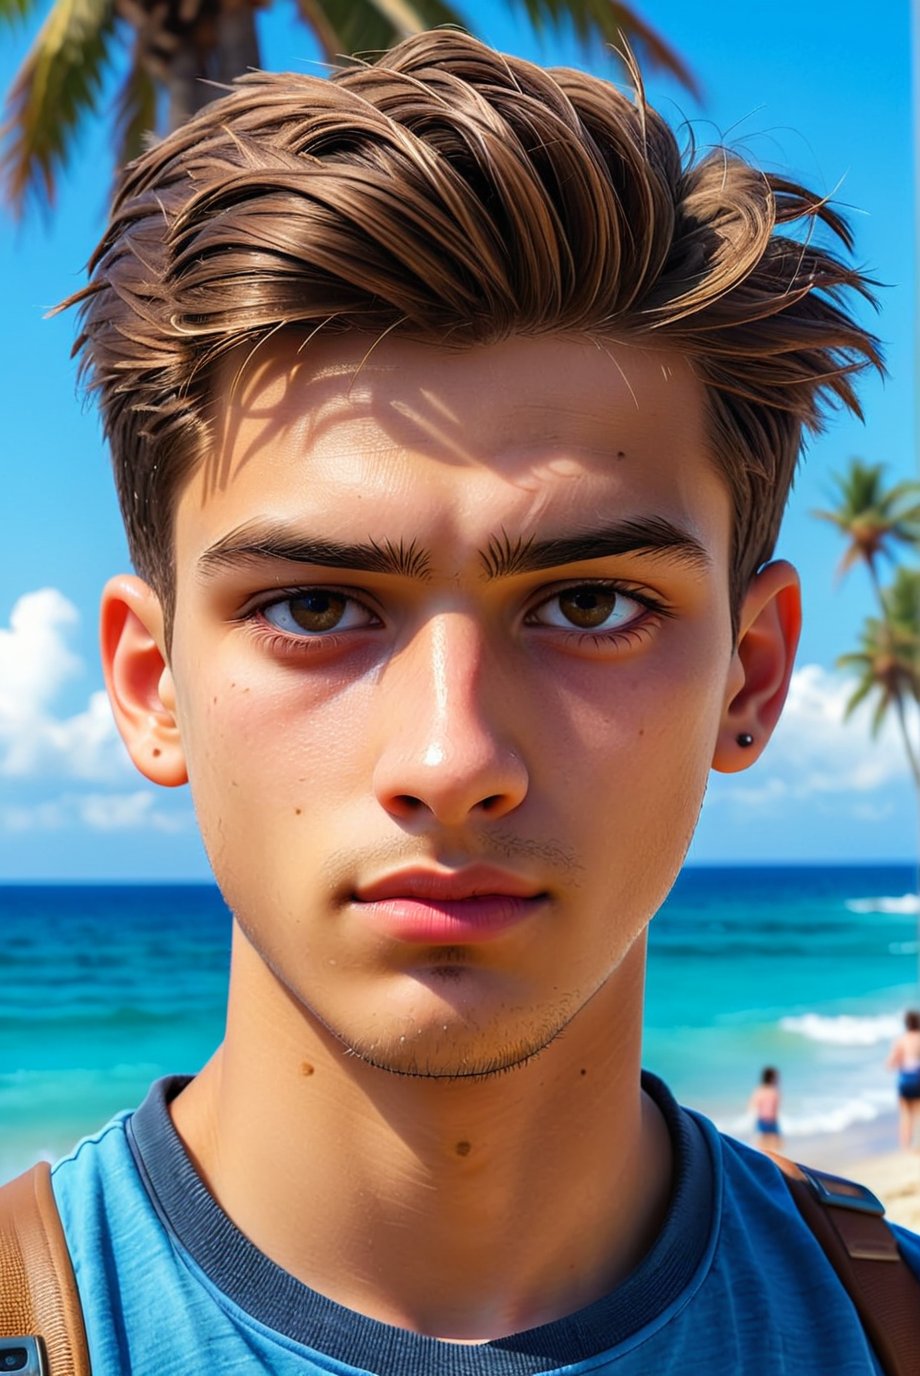 1 boy, (21 years old), short hair, perfect hair, light skin, white, Italian brown, realism, cool, Nonchalant, beach day, trunks, conservative, chad, chizzled, bad boy, thug, mean mug, mean face, Instagram, selfie, handsome, cool, masculine, hard, innocent, happy, young, vibrant, cute, slender/slim body shape, normal size head, head that fits body, high quality, masterpiece , 3D, background of school